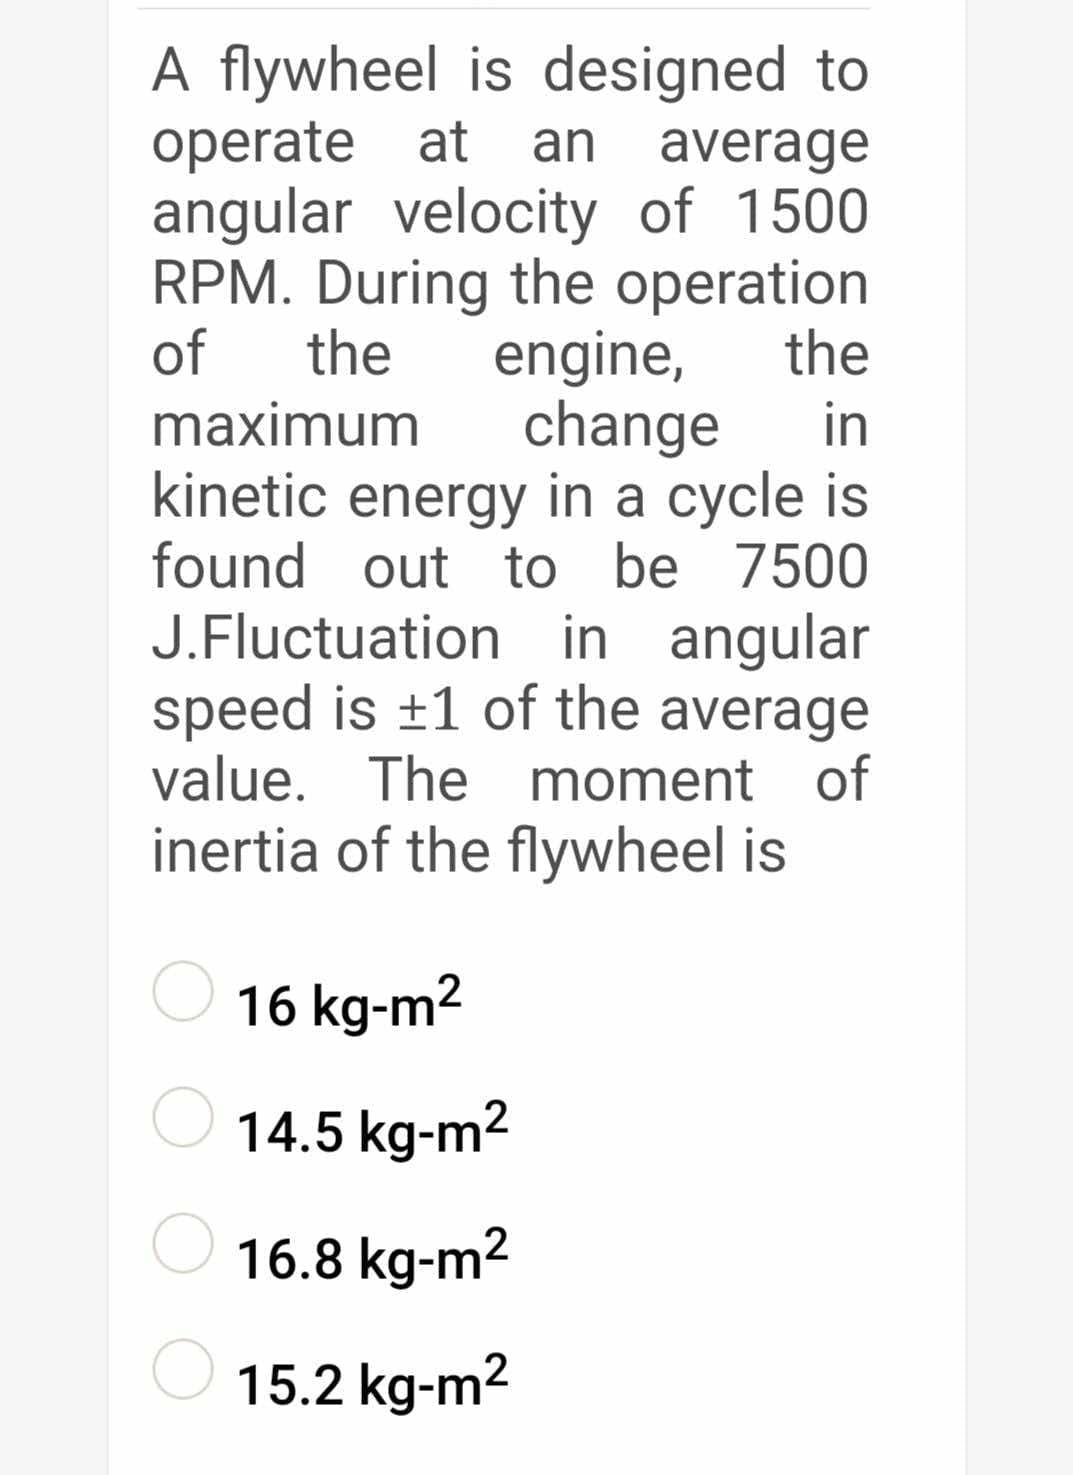 A flywheel is designed to
operate at
angular velocity of 1500
RPM. During the operation
the
an
average
of
the
engine,
change
maximum
in
kinetic energy in a cycle is
found out to be 7500
J.Fluctuation in angular
speed is +1 of the average
value. The moment of
inertia of the flywheel is
16 kg-m2
14.5 kg-m2
16.8 kg-m2
15.2 kg-m2
